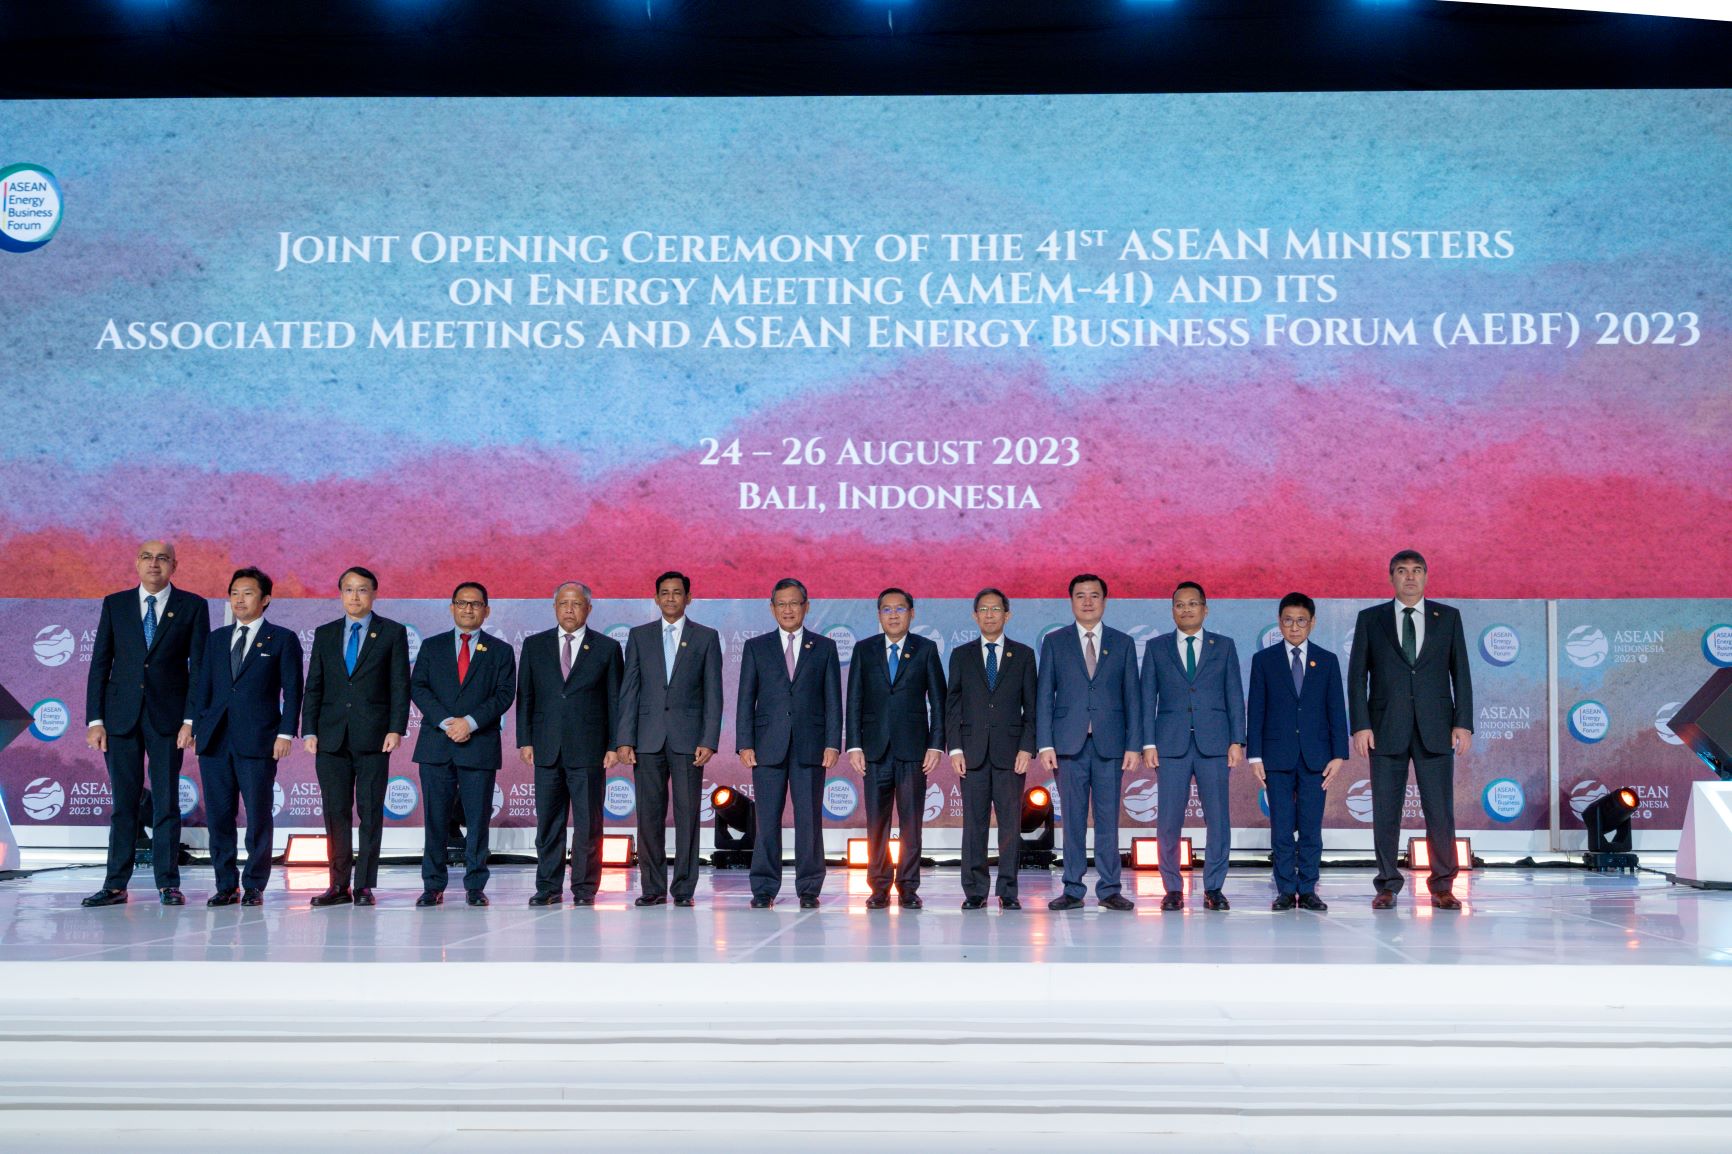 https://highend-traveller.com/asean-energy-business-forum-2023-officially-opens-collaboration-to-drive-energy-progress/